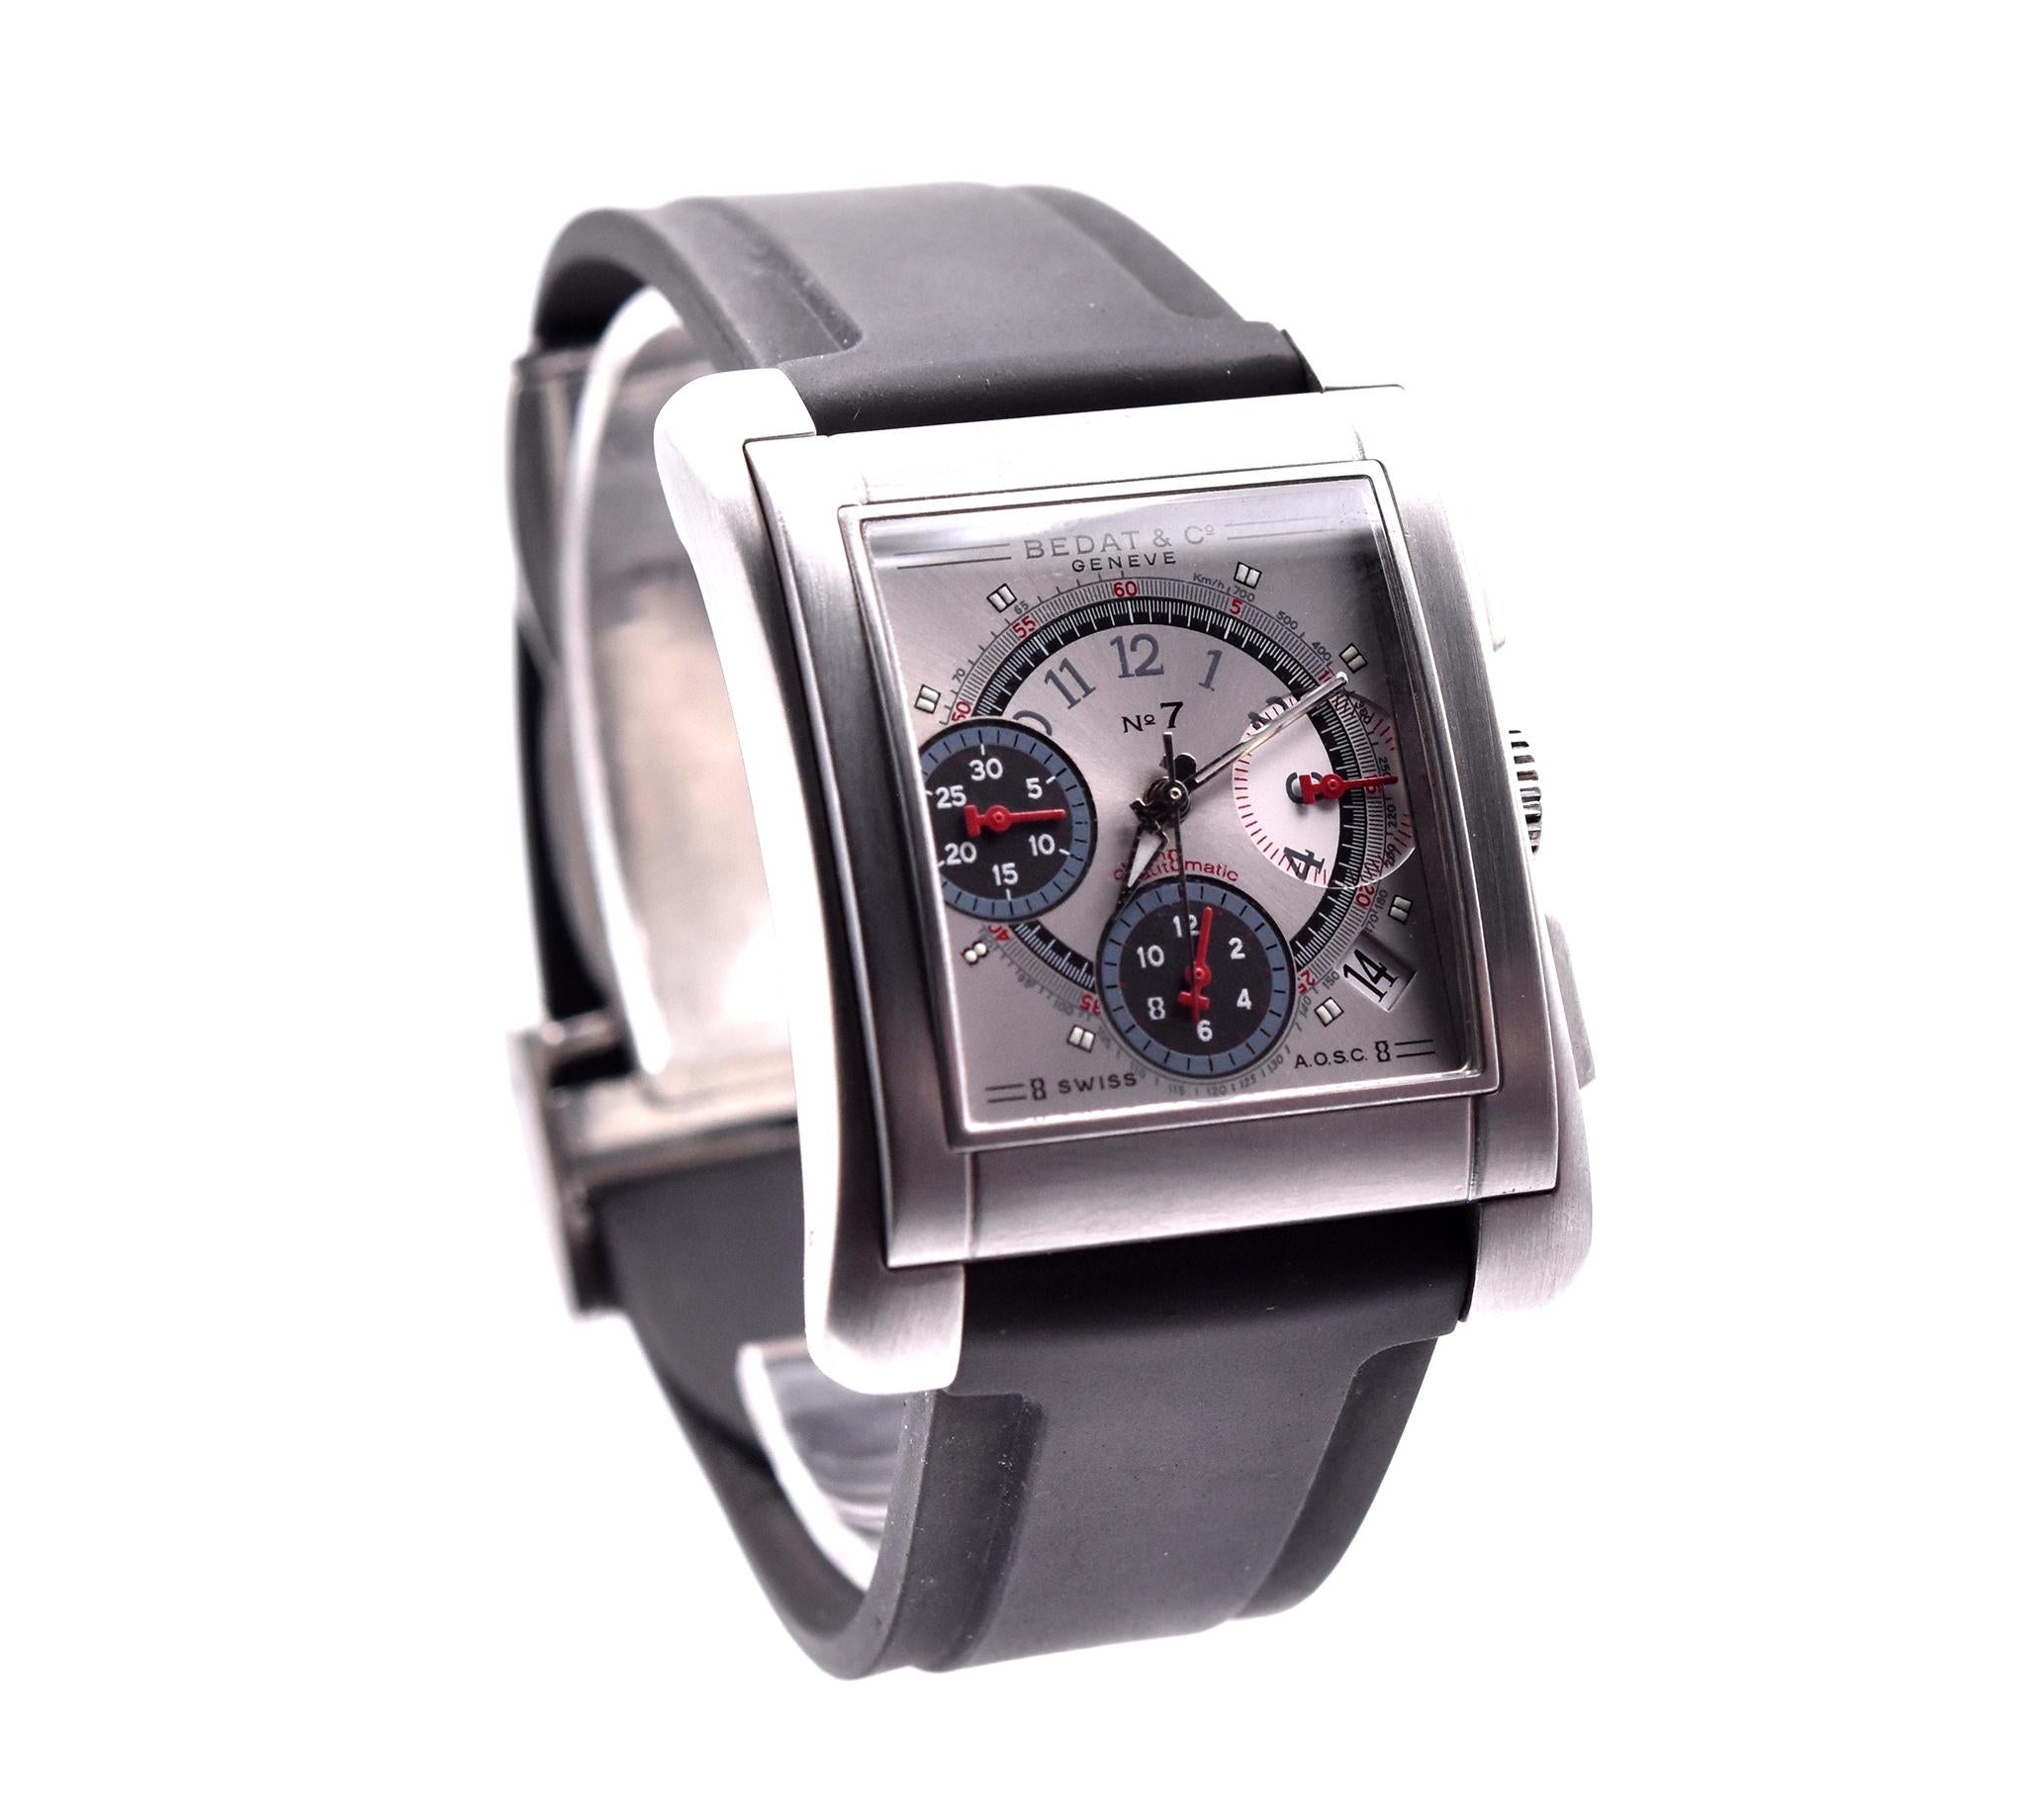 Movement: automatic
Function: hours, minuets, seconds, date, chronograph
Case: 32.5 X 45mm rectangular stainless steel case, sapphire crystal
Bracelet: black rubber strap, integrated clasp 
Dial: silver chronograph dial
Reference #: 768
Serial #